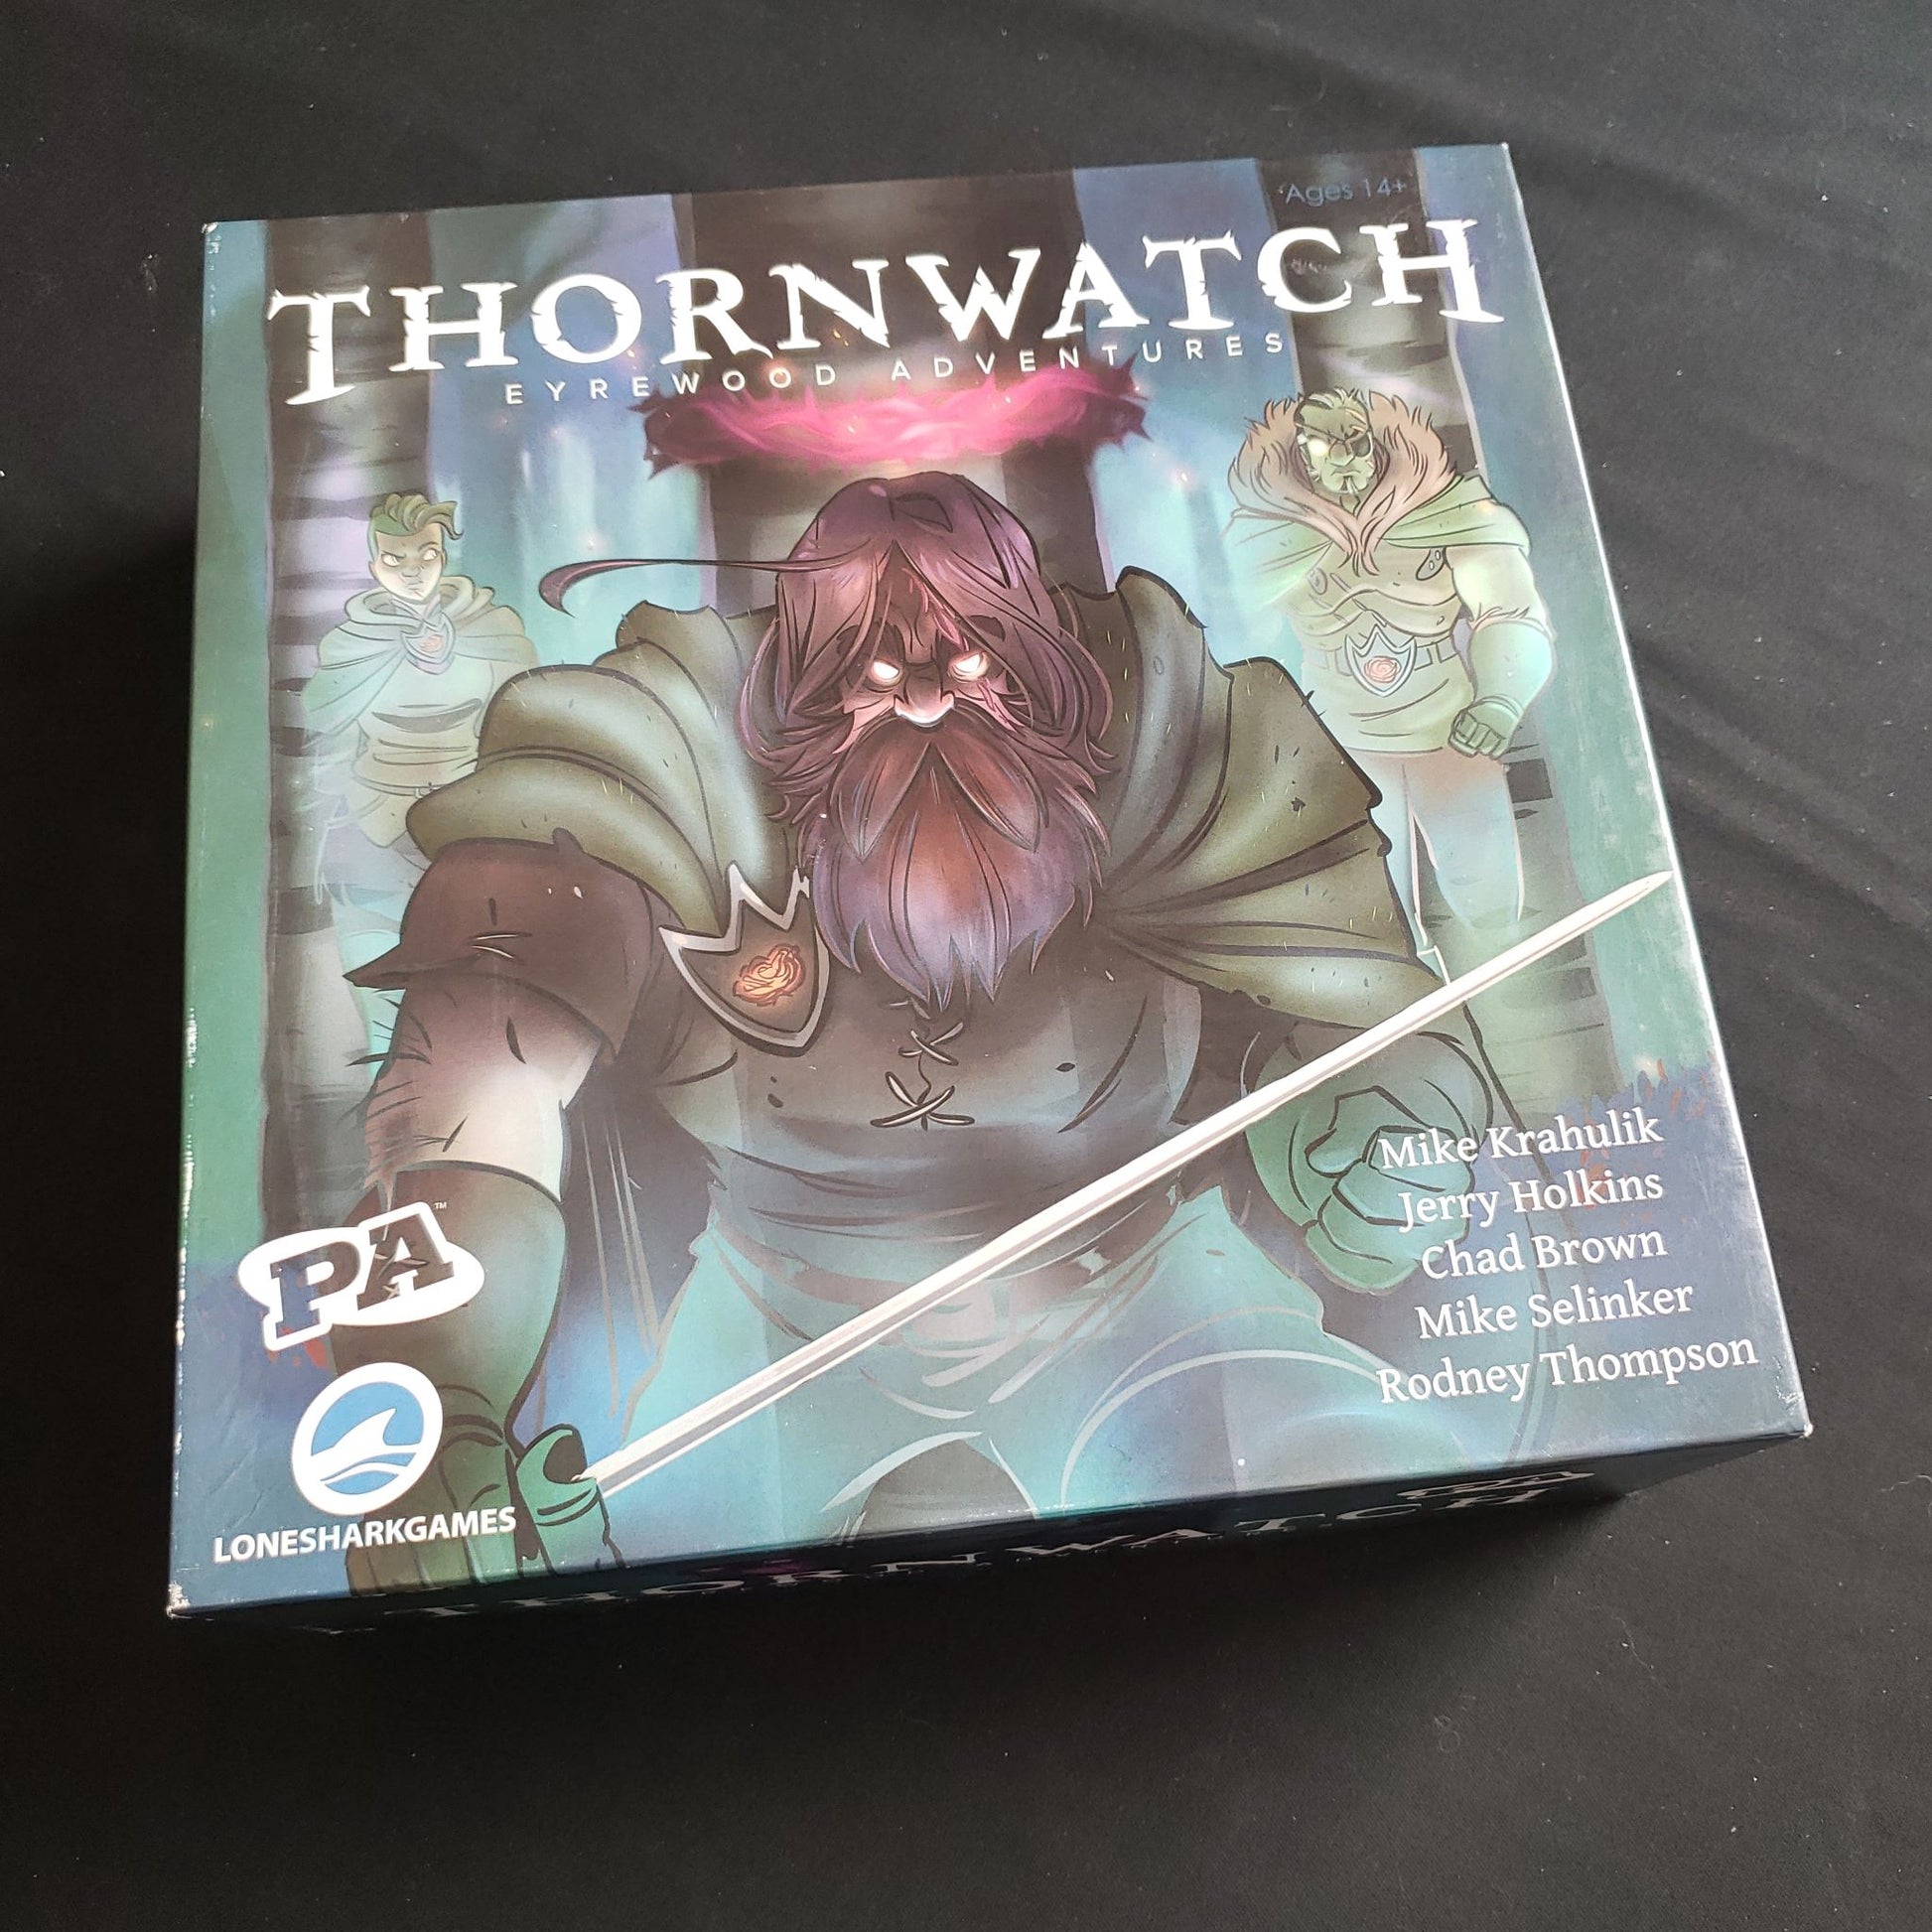 Image shows the front cover of the box of the Thornwatch board game